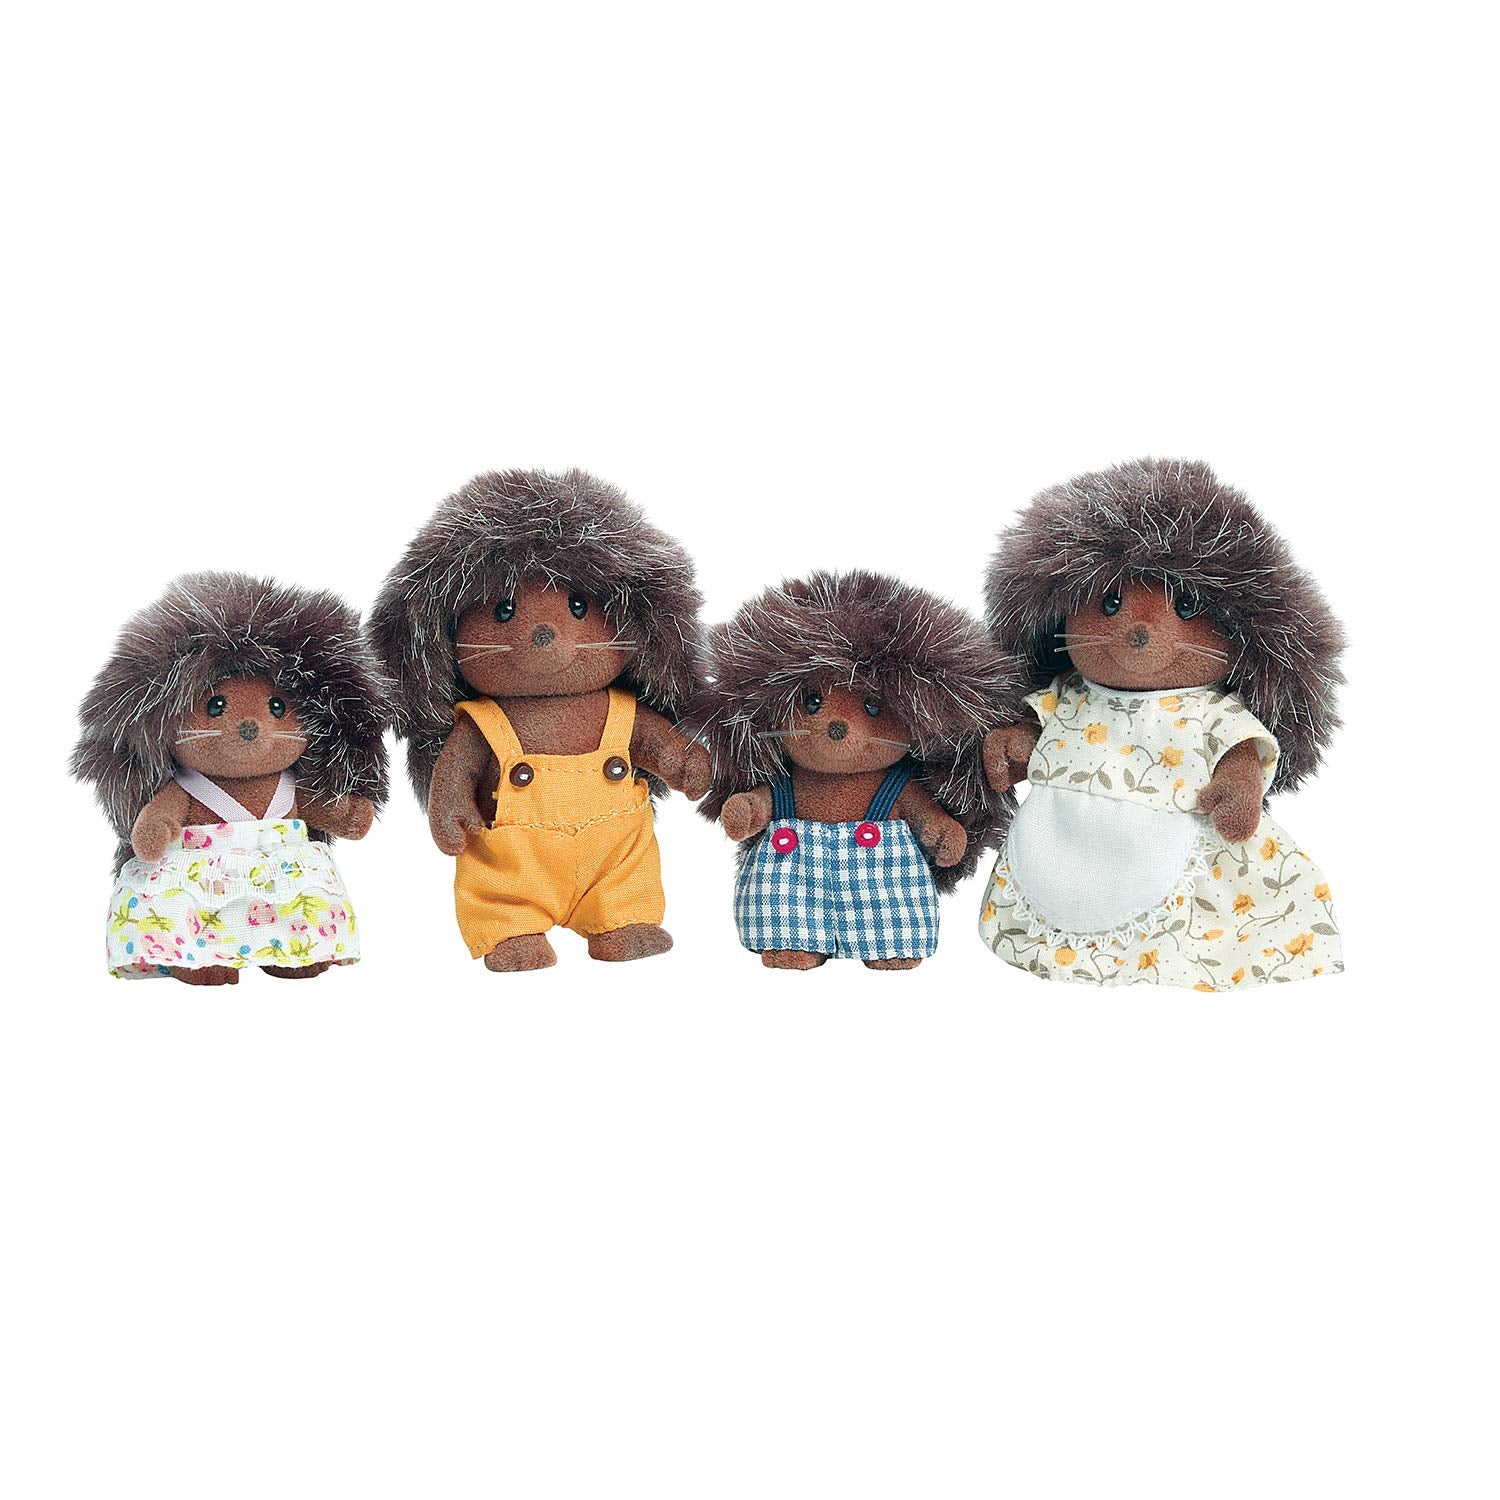 Calico Critters Pickleweeds Hedgehog Family - Set of 4 Collectible Doll Figures for Children Ages 3+